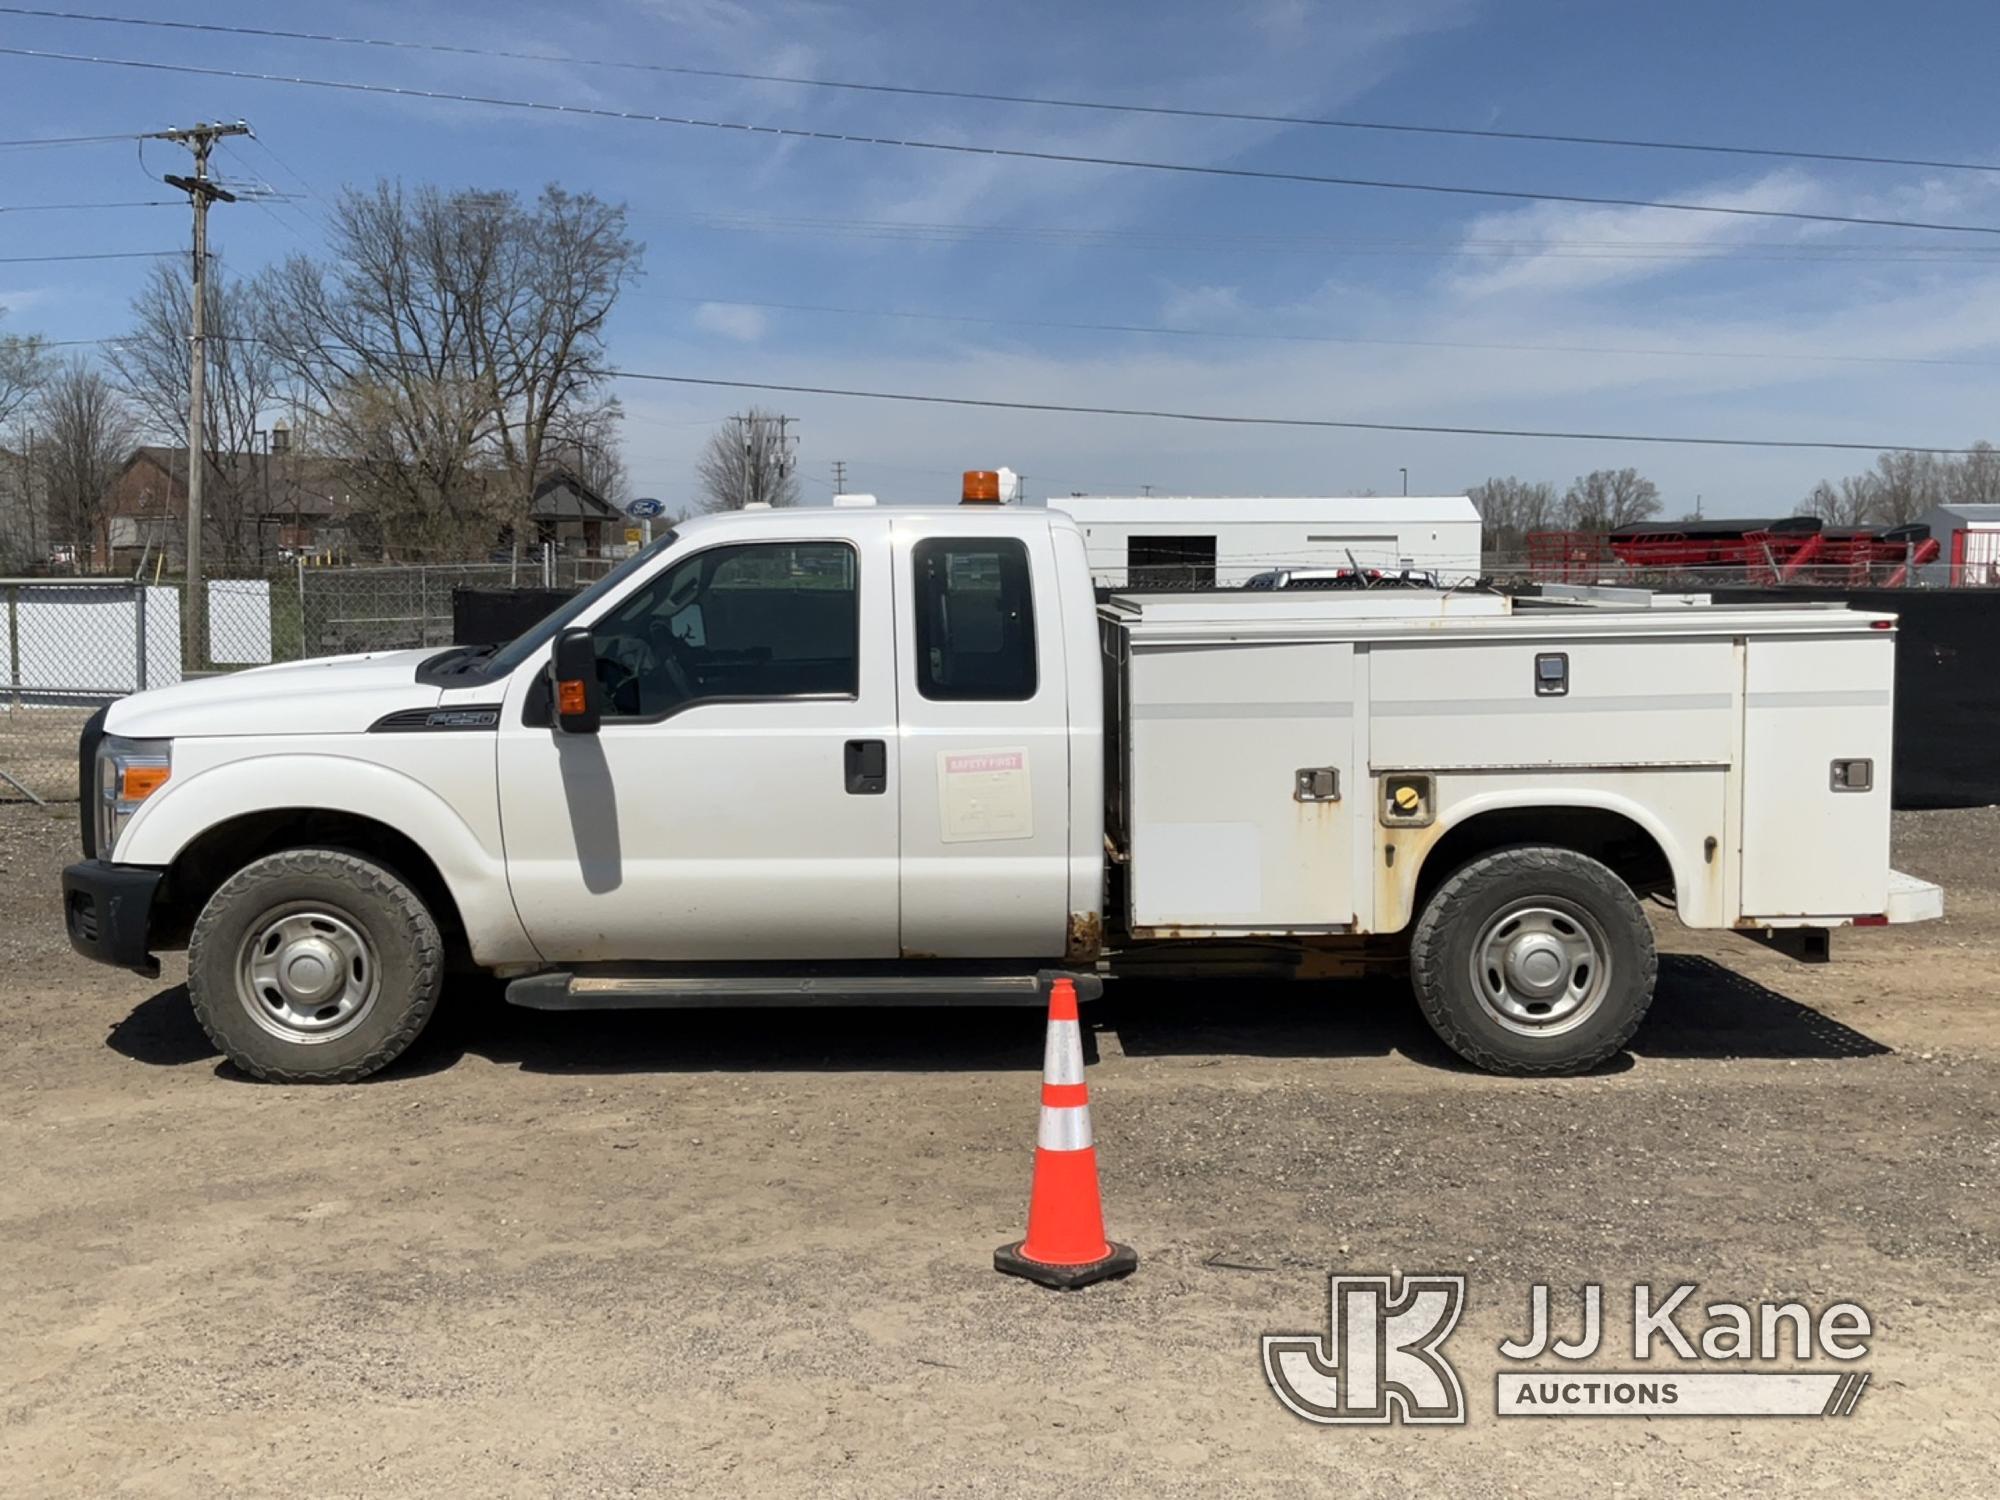 (Charlotte, MI) 2013 Ford F250 Extended-Cab Service Truck Runs, Moves, Jump To Start, Rust, Bad Star